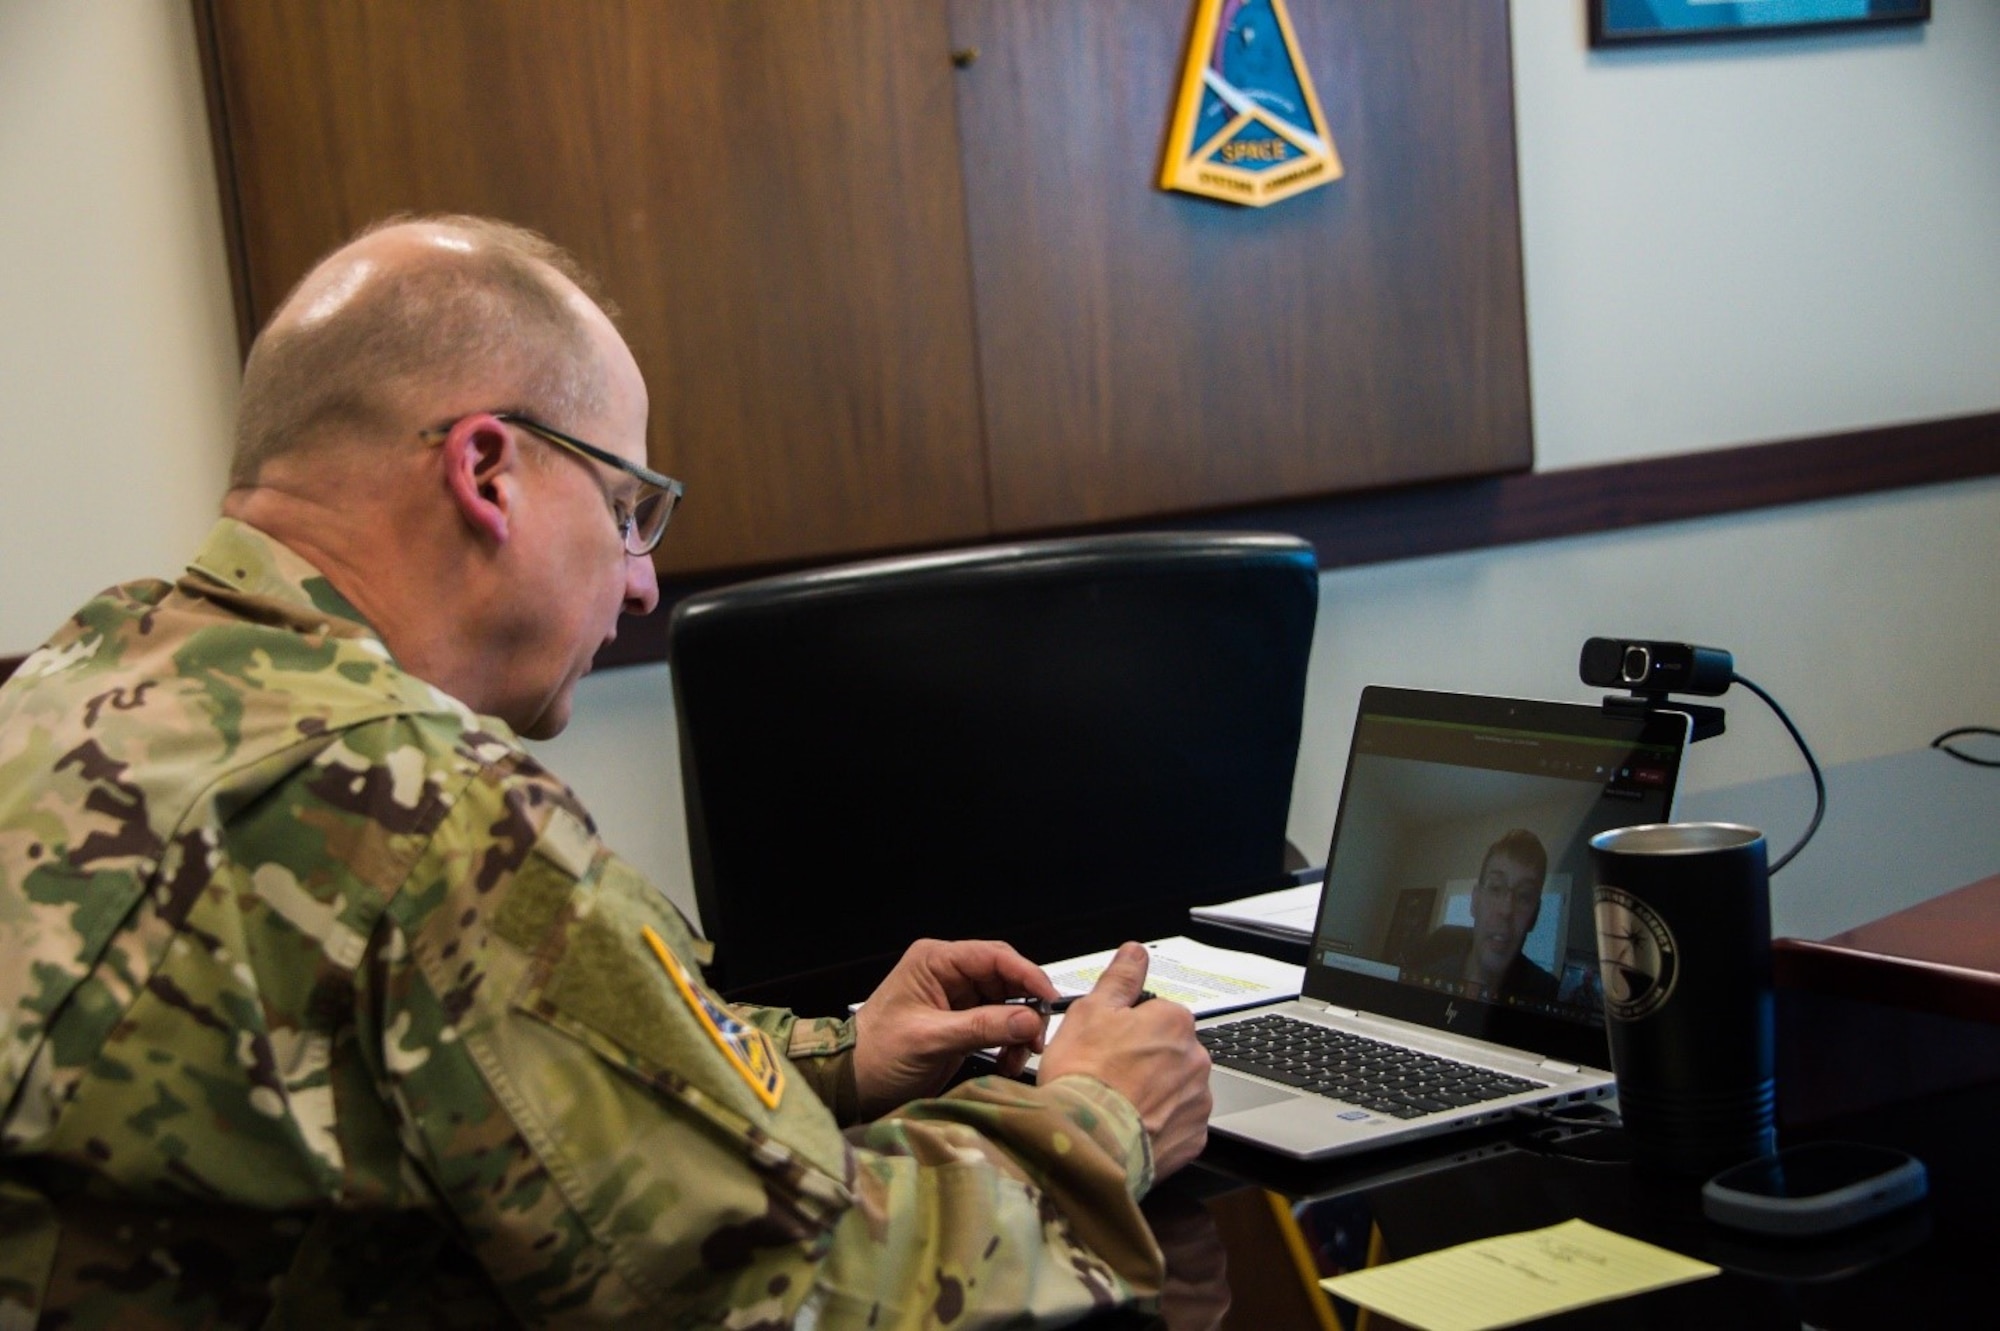 Lt. Gen. Michael A. Guetlein, SSC commander, meets virtually with one of his mentees during the SSC Spring Speed Mentoring Event on March 1 where SSC personnel across the Command’s 15 operating locations were invited to participate in one-on-one sessions with SSC leaders.